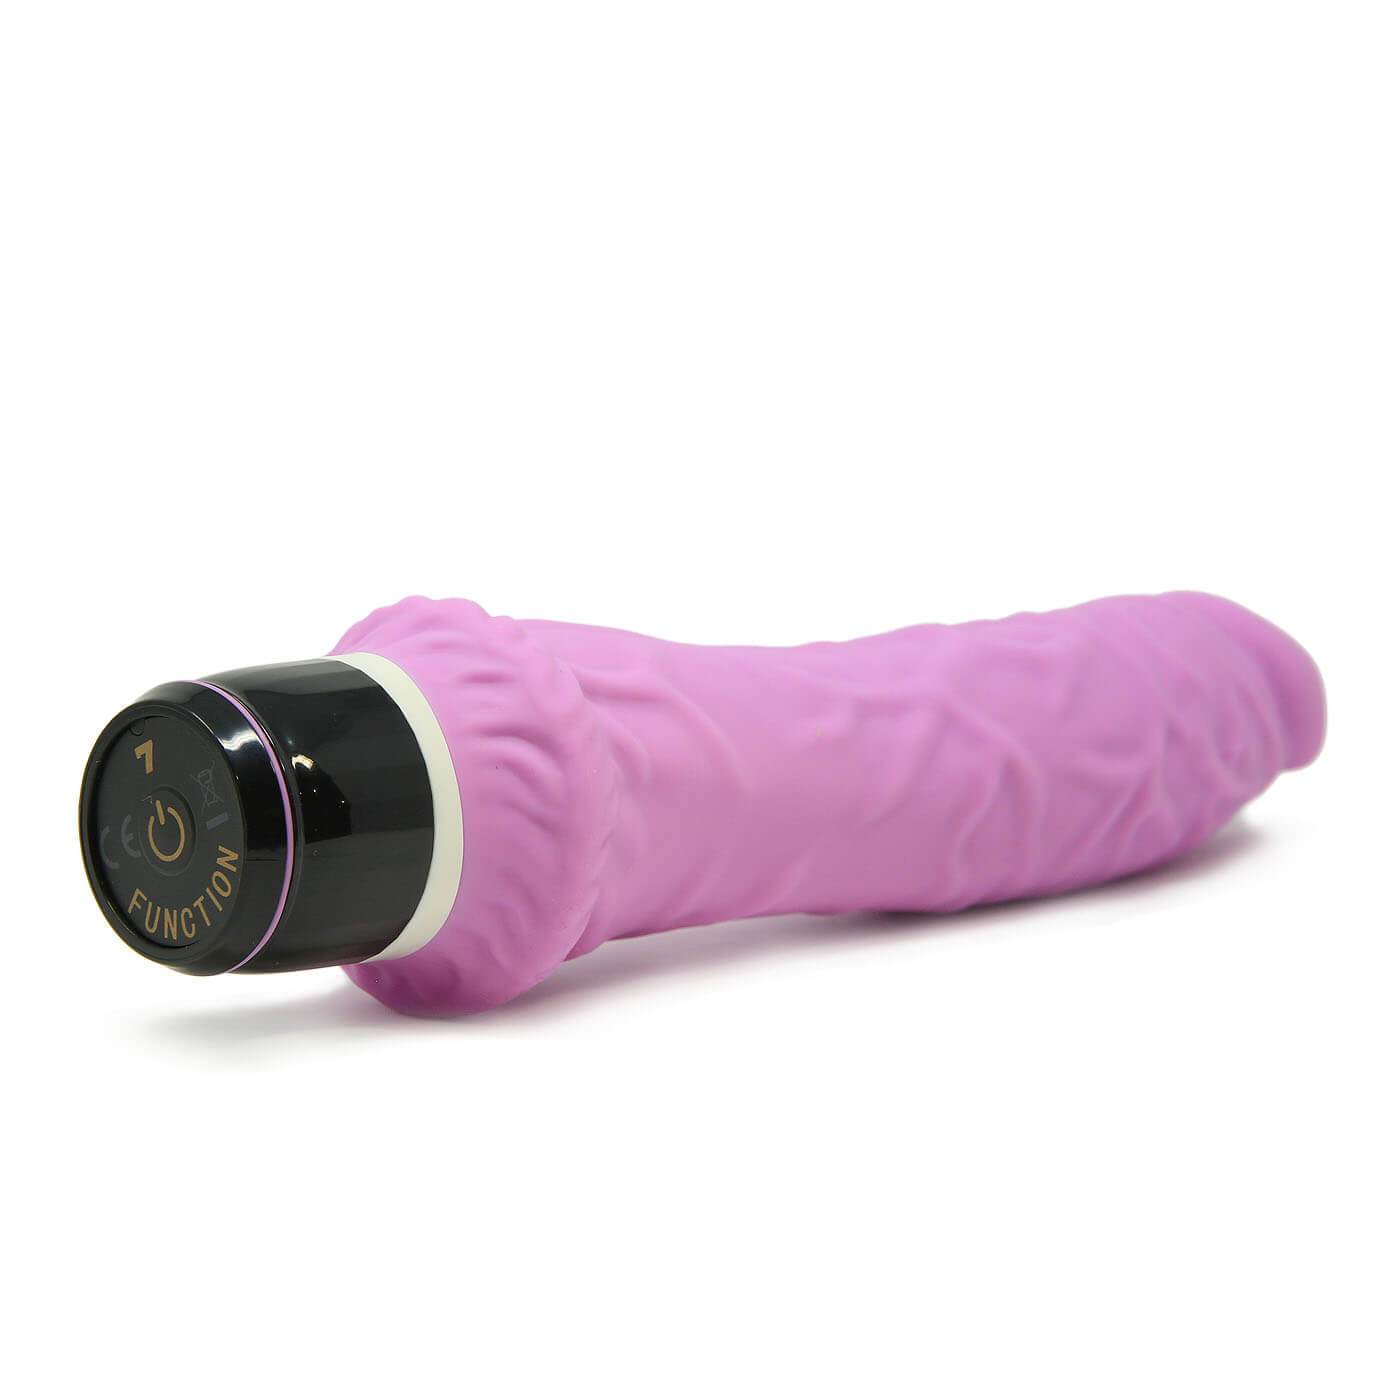 Inflatable stud dildo 7 inch